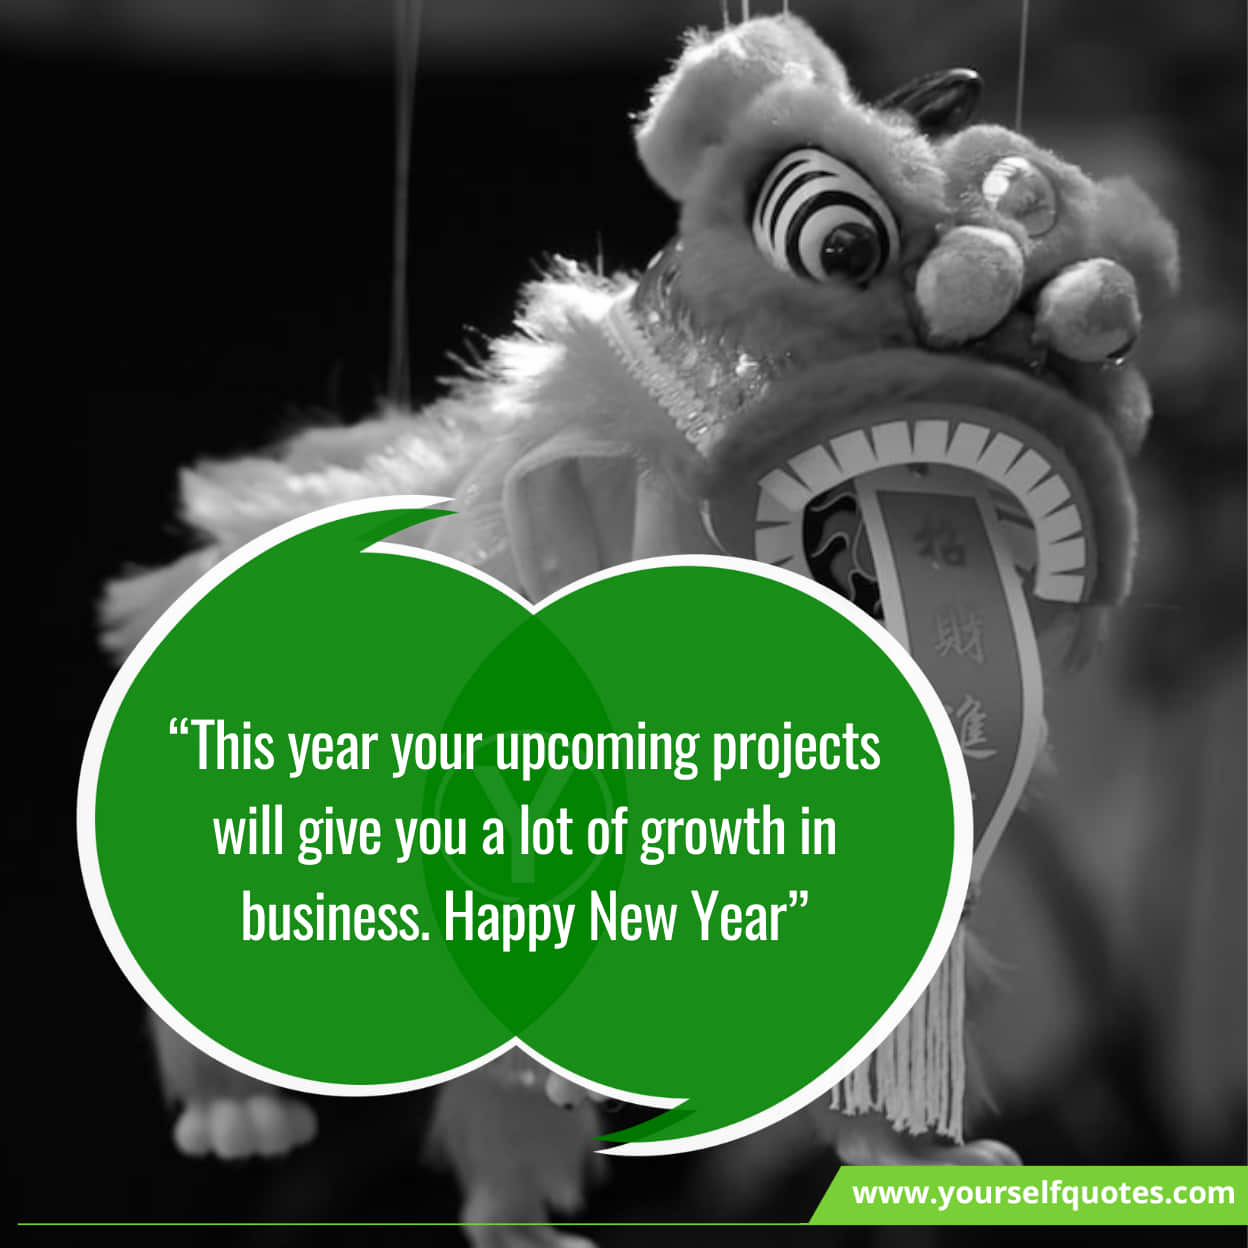 Upbeat Chinese New Year Wishes for Business